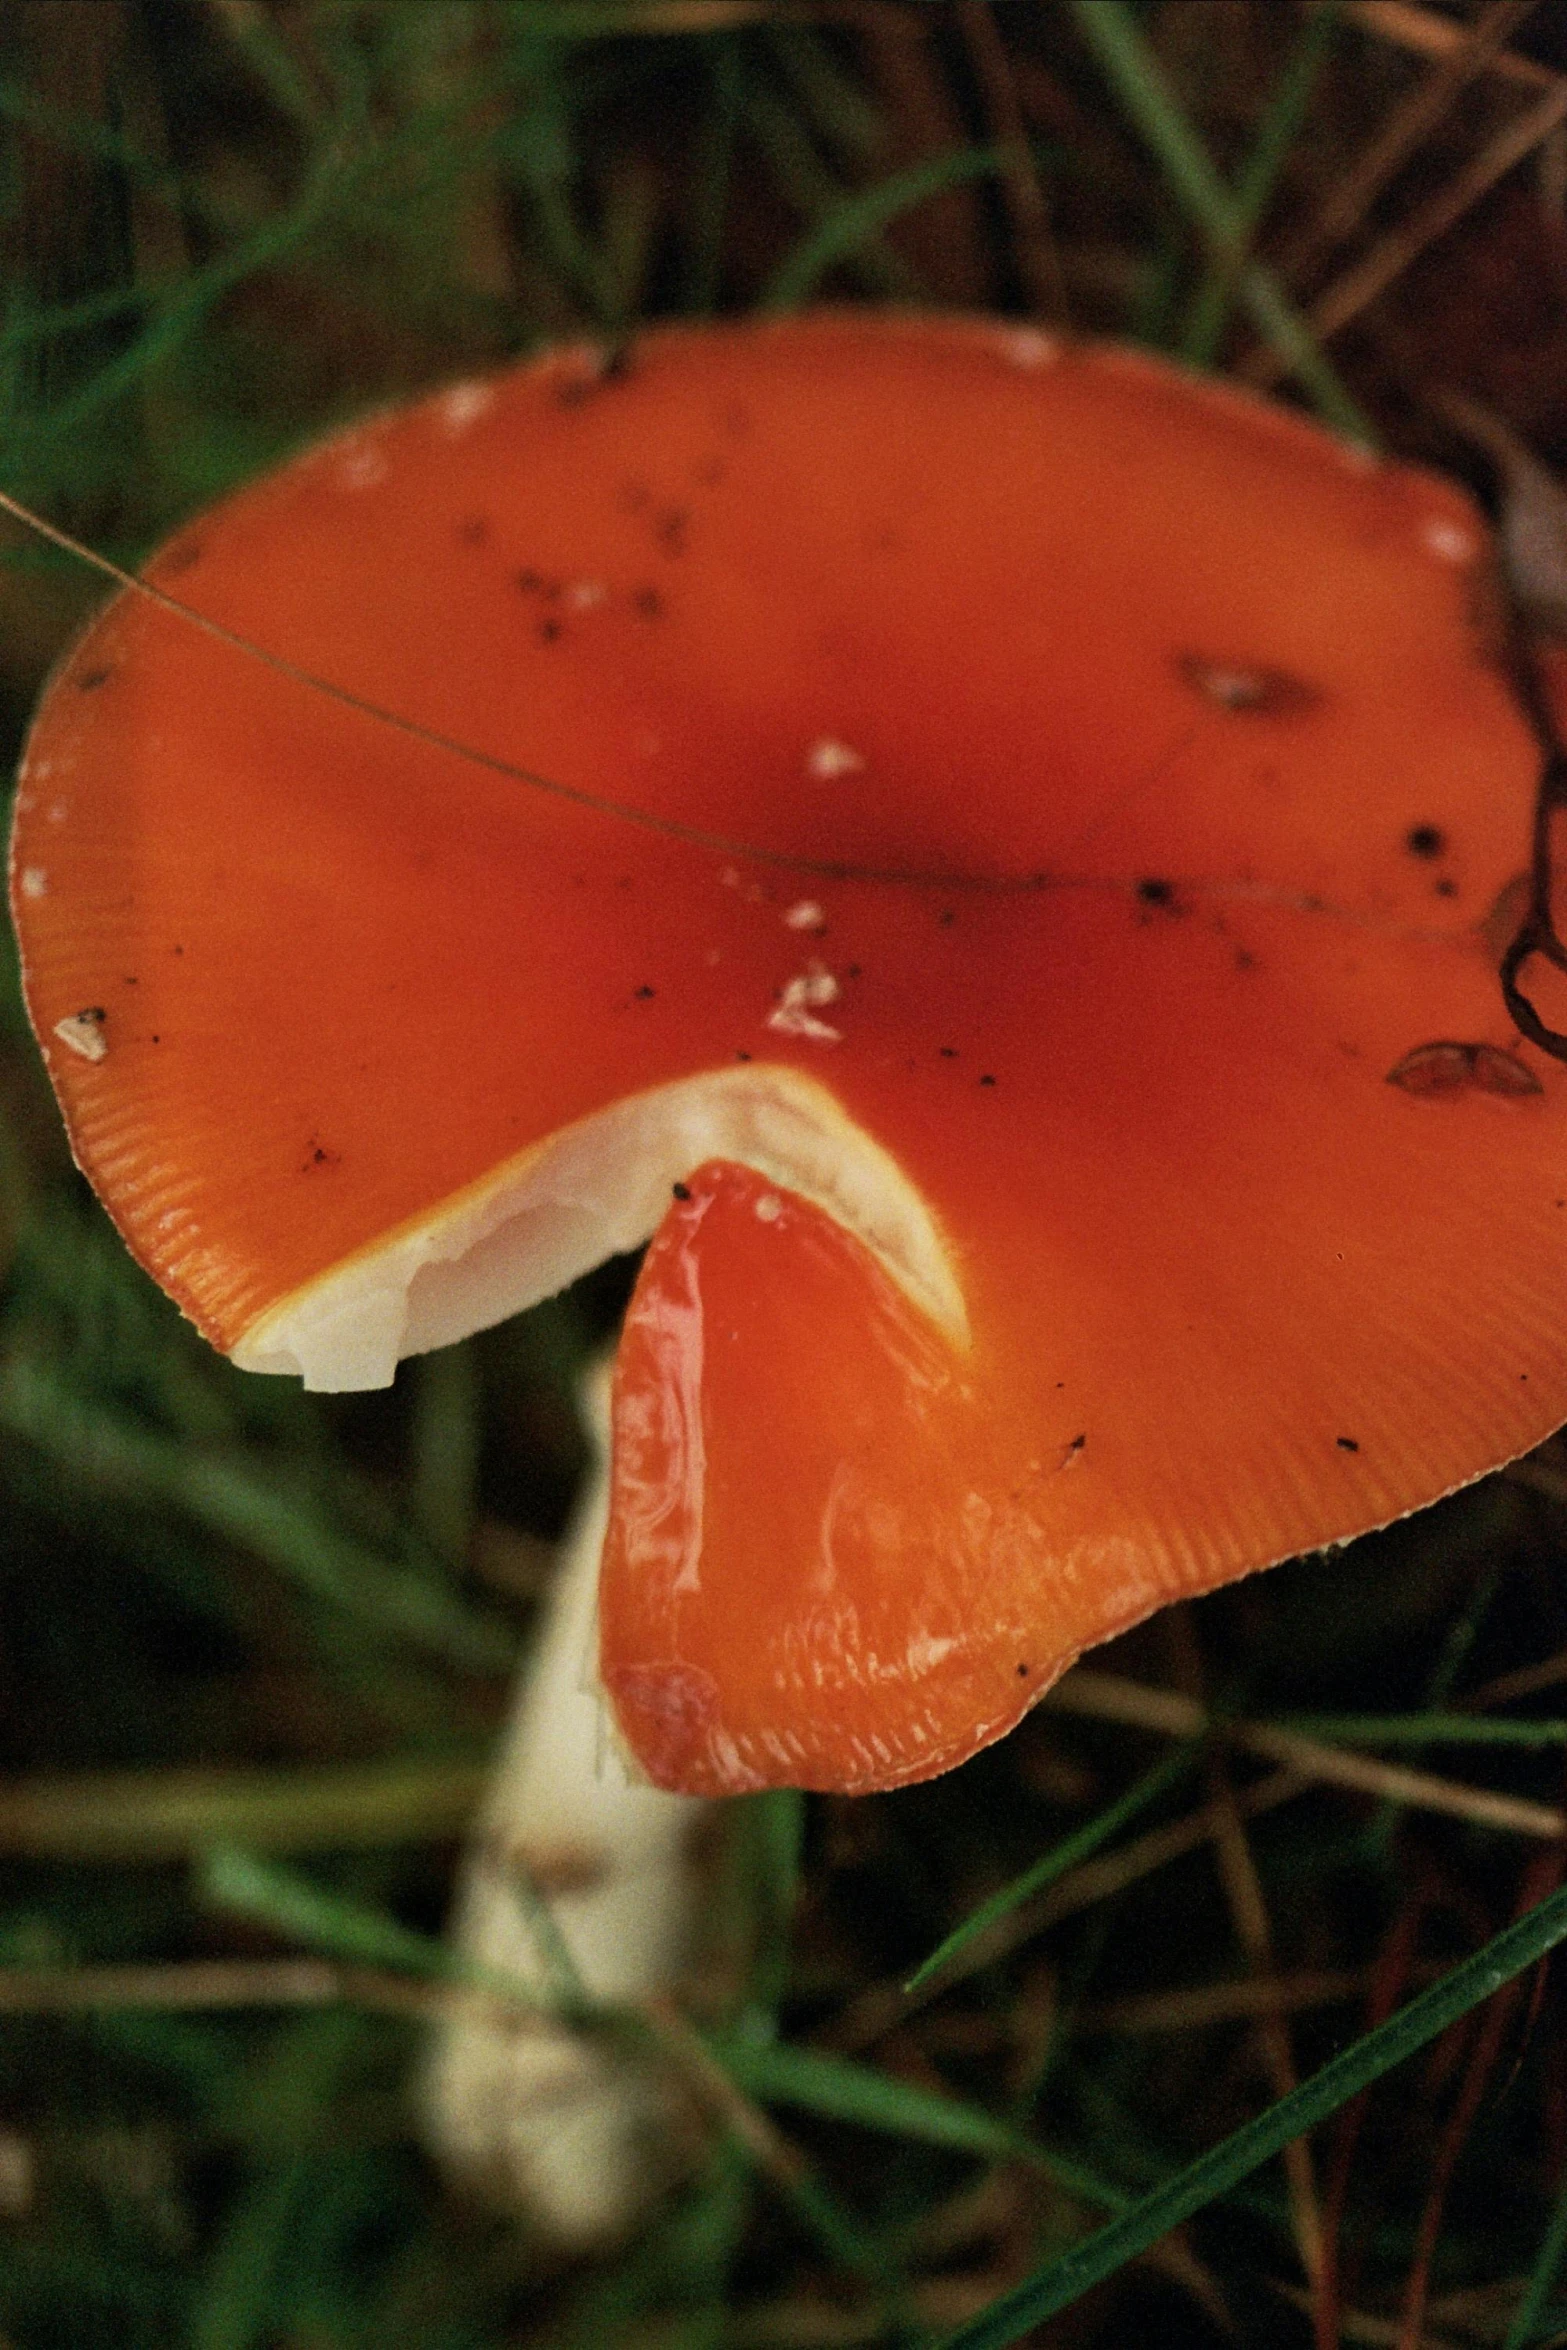 an orange mushroom is on the ground in the grass